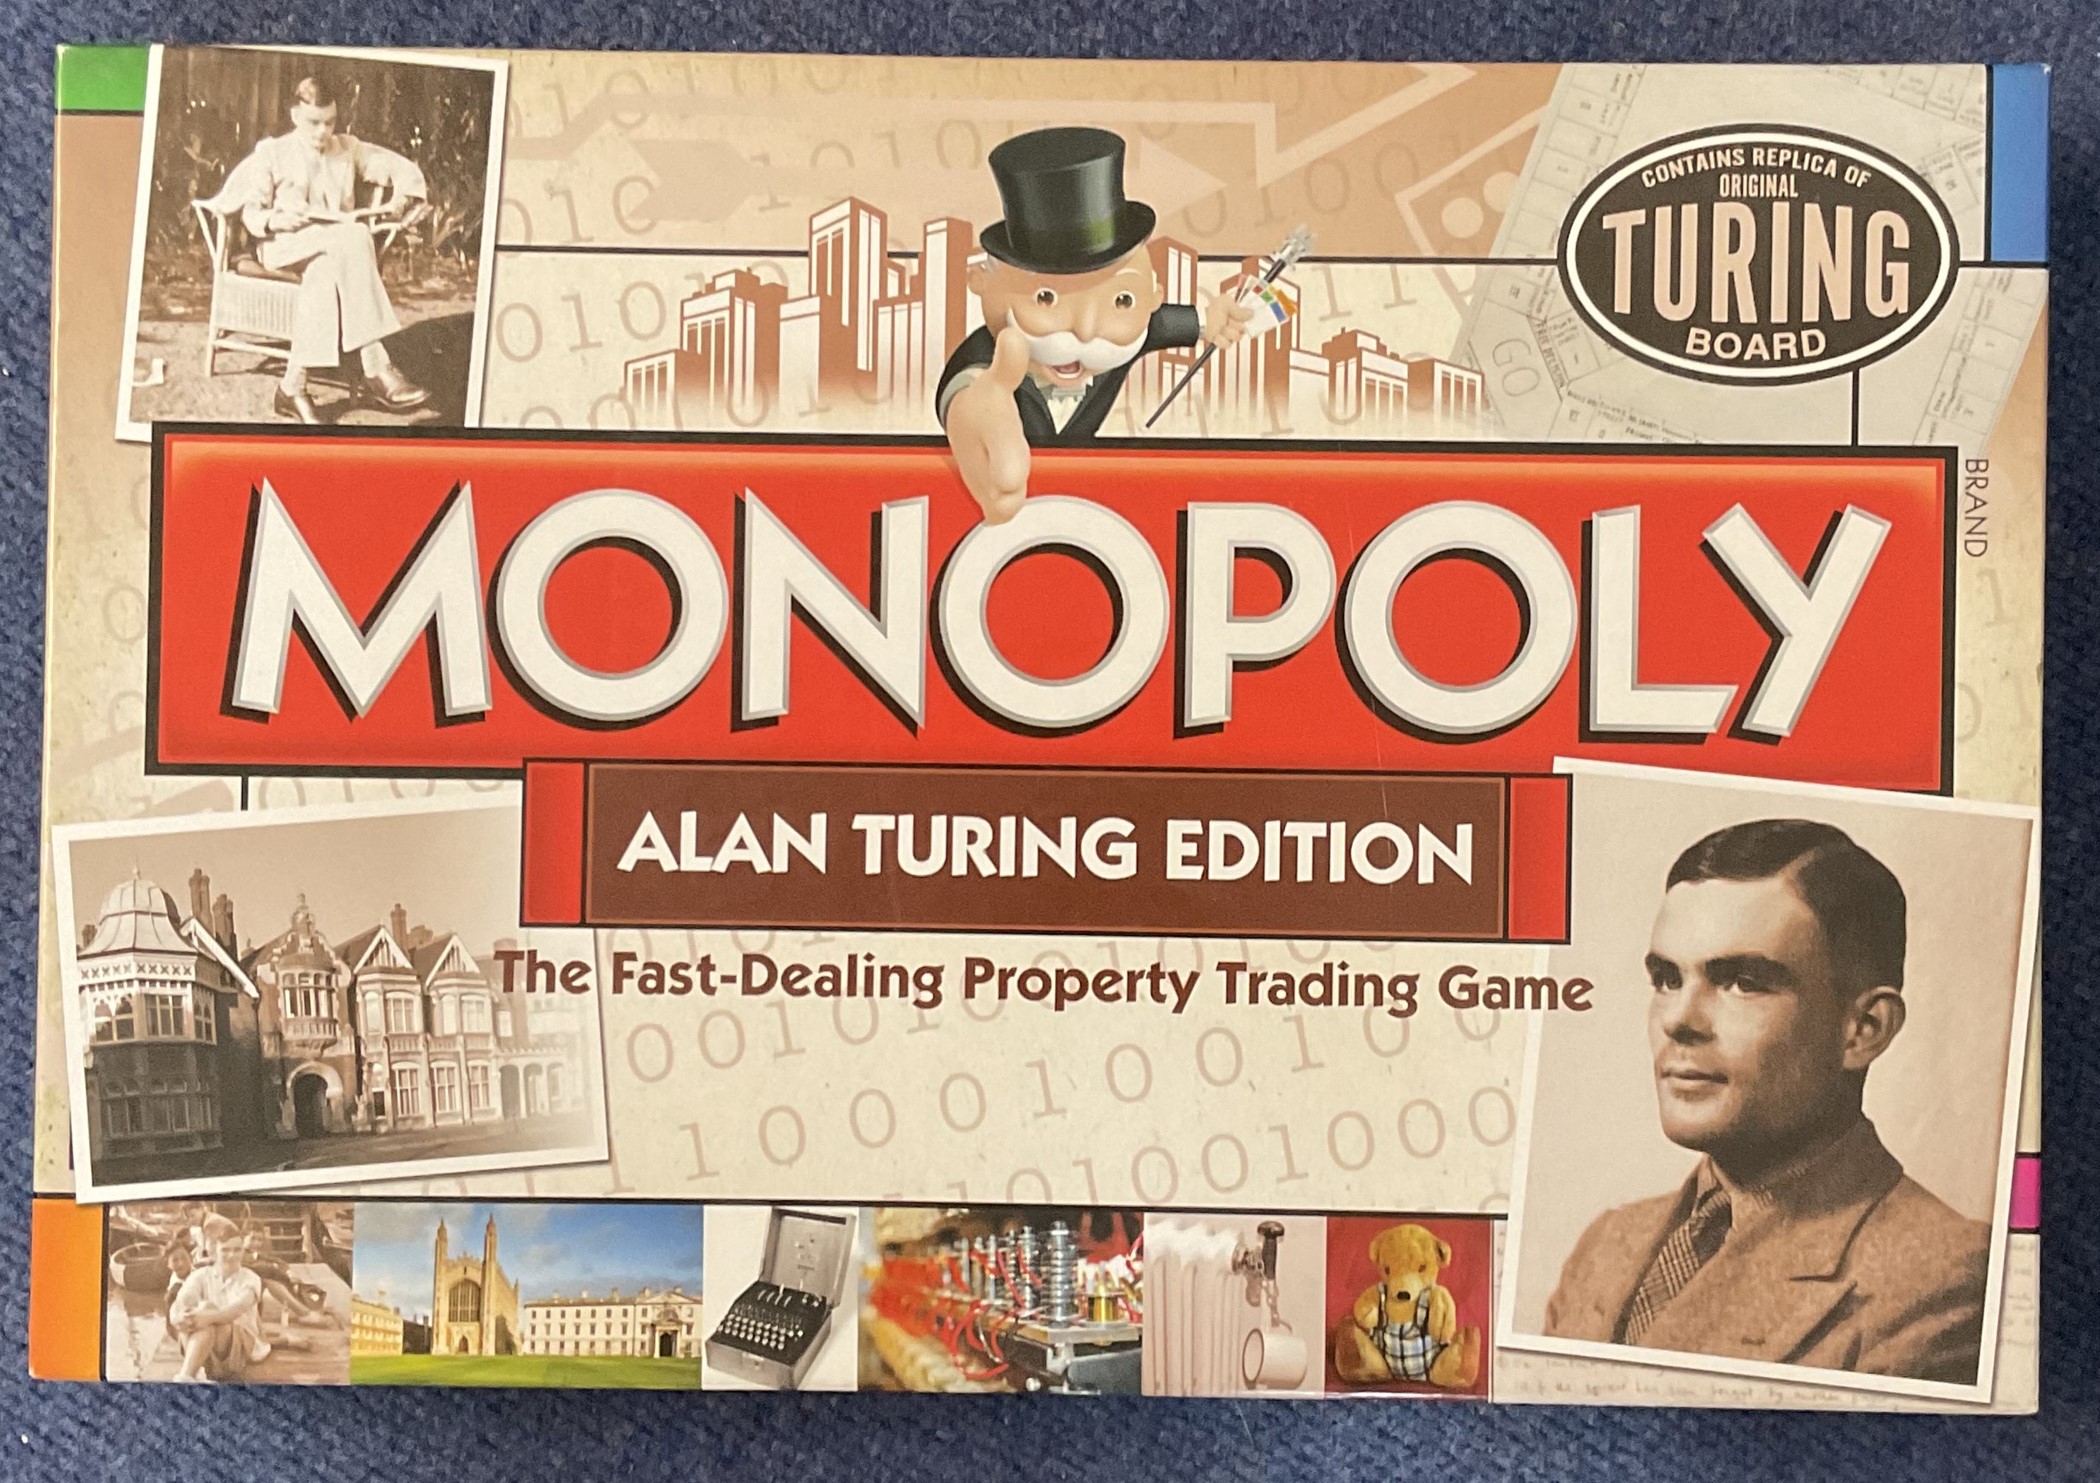 Monopoly game. Alan Turing Edition. Contains original Turning board. Produced in 1935 in England.